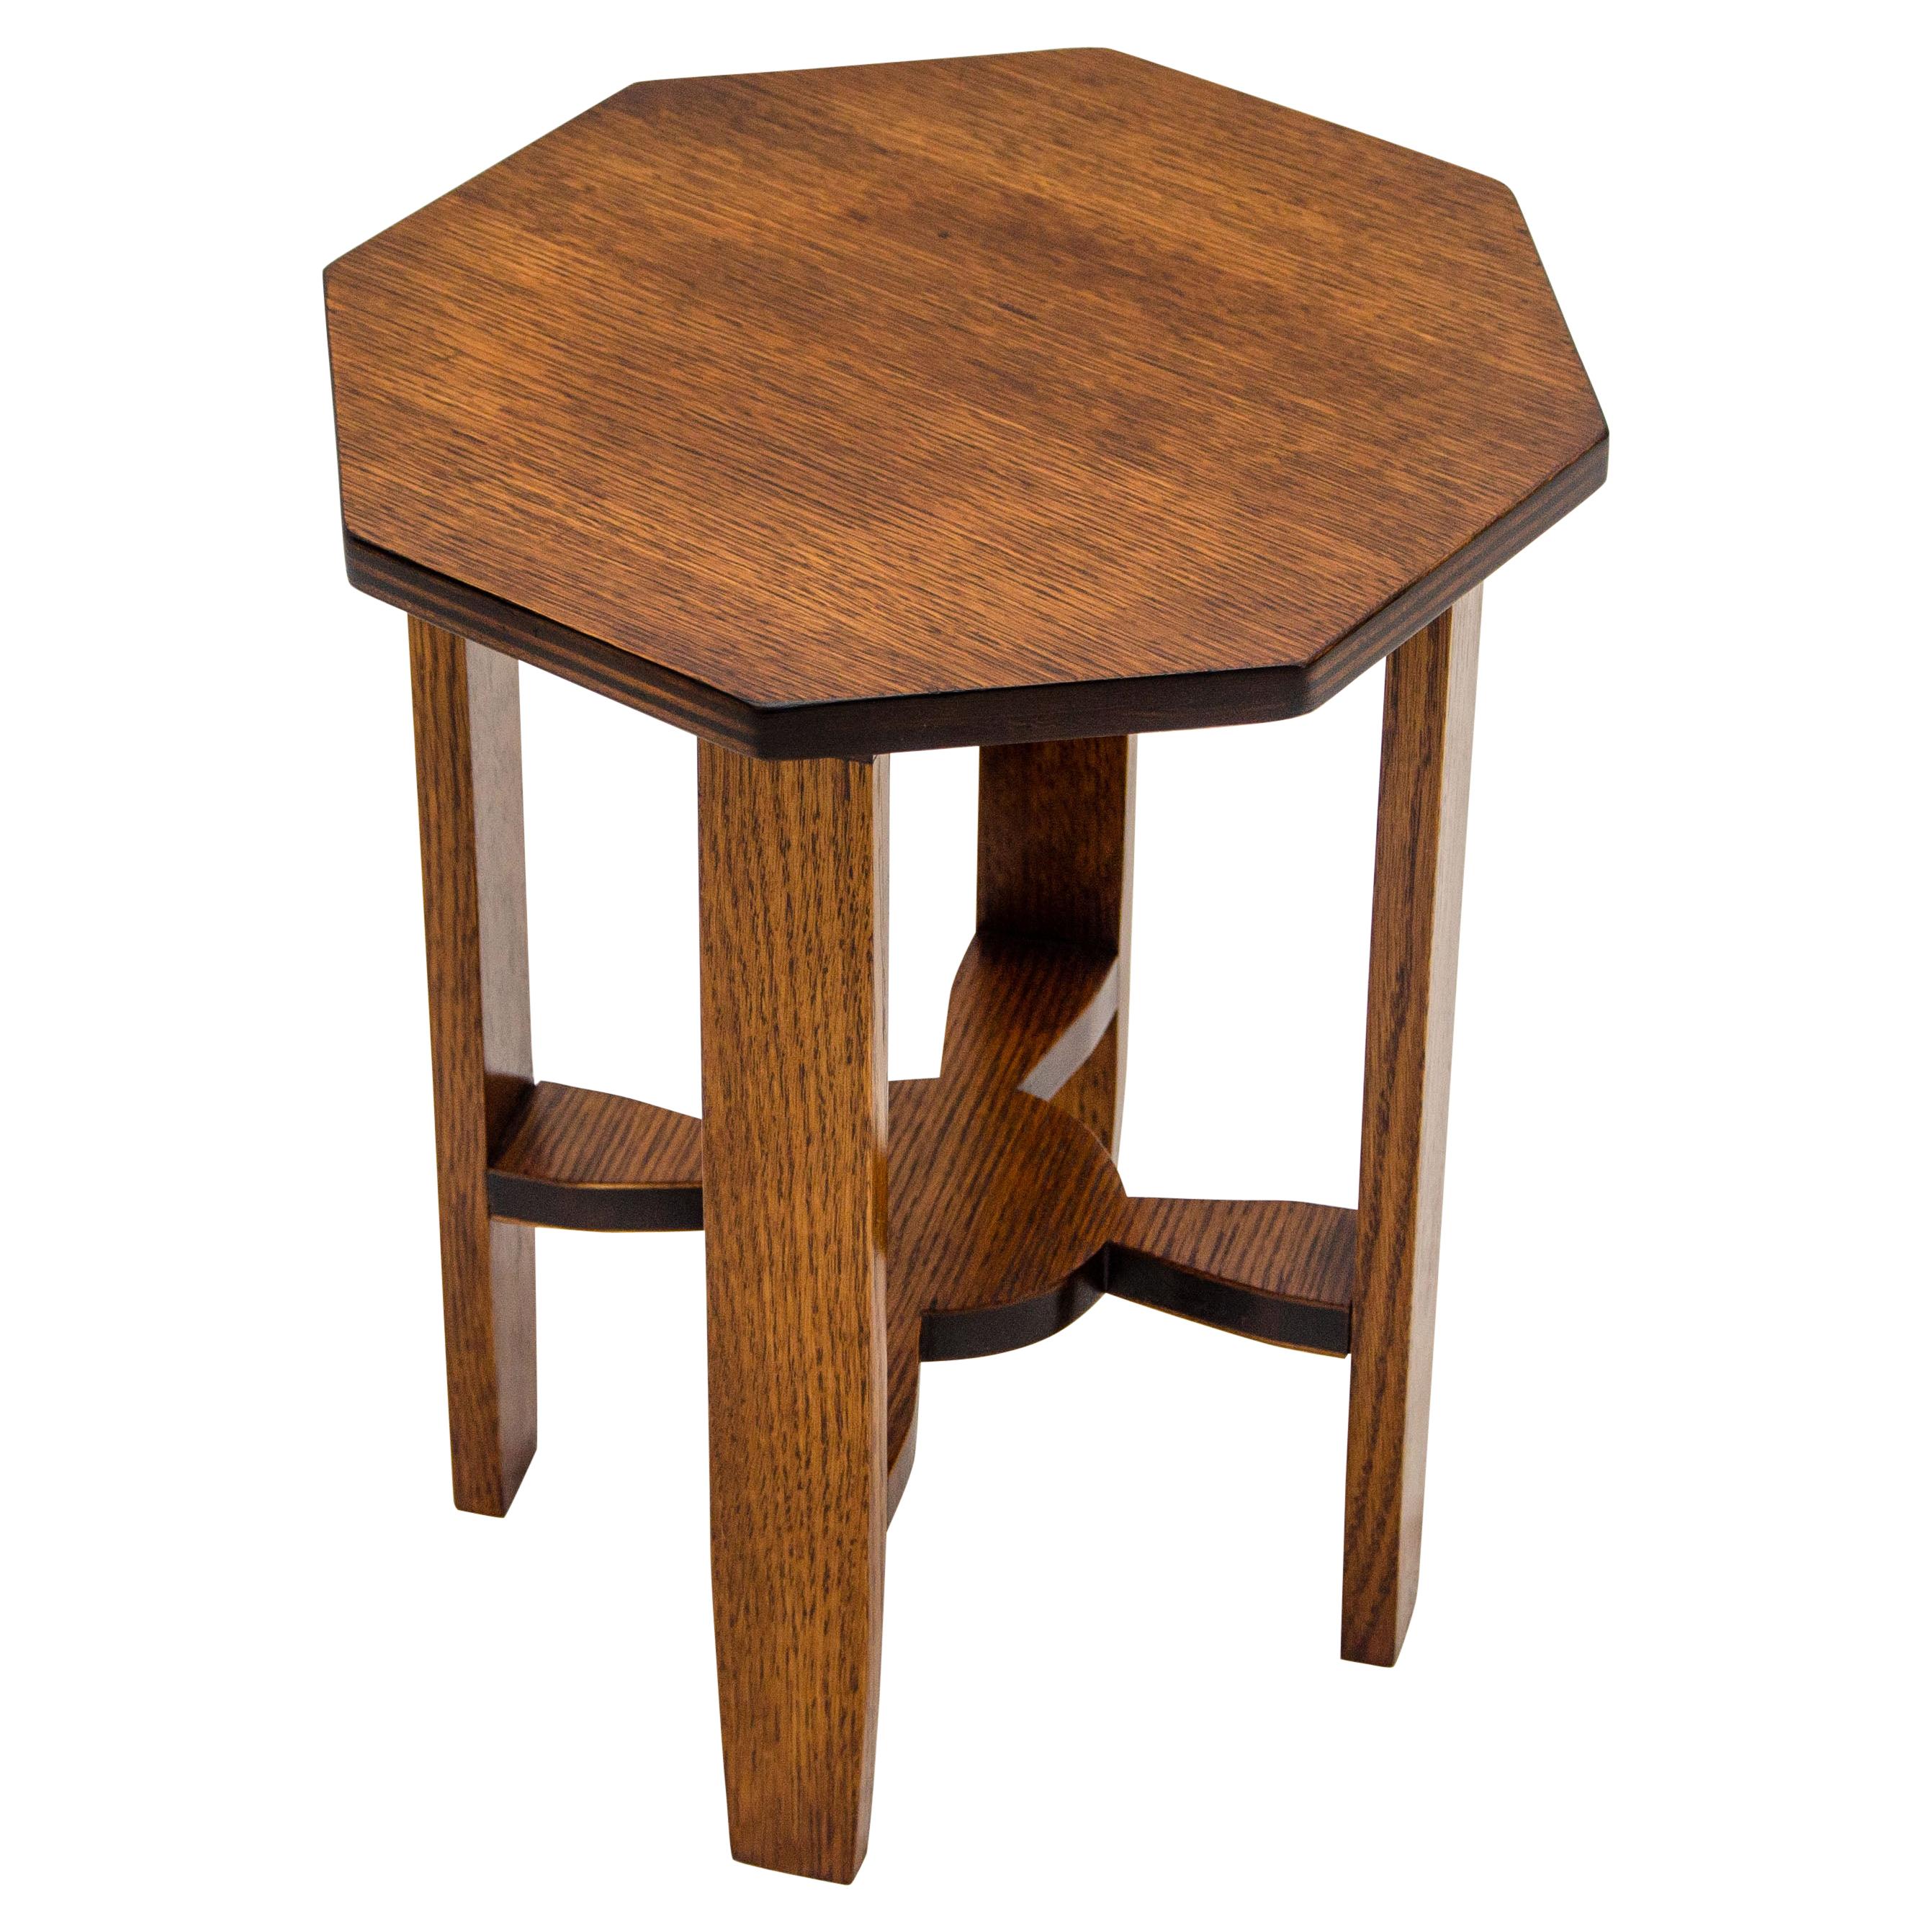 Small Arts & Crafts Style Oak Plant Stand / Table